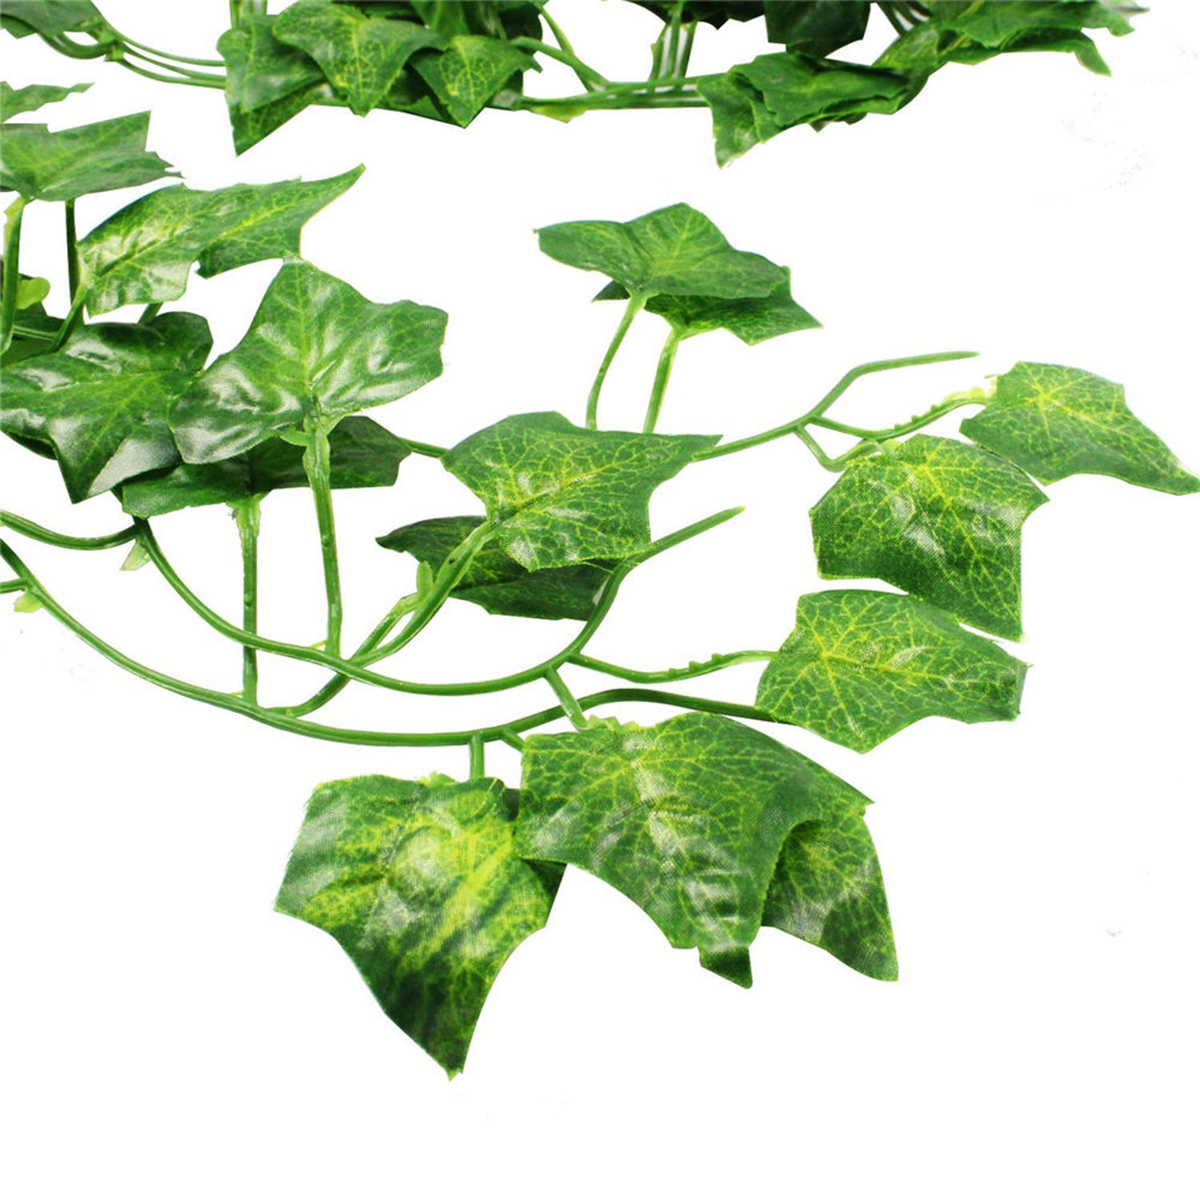 12pcs-Artificial-Greenery-Vine-Ivy-Leaves-Garland-Hanging-Wedding-Party-Garden-Decorations-1679234-6